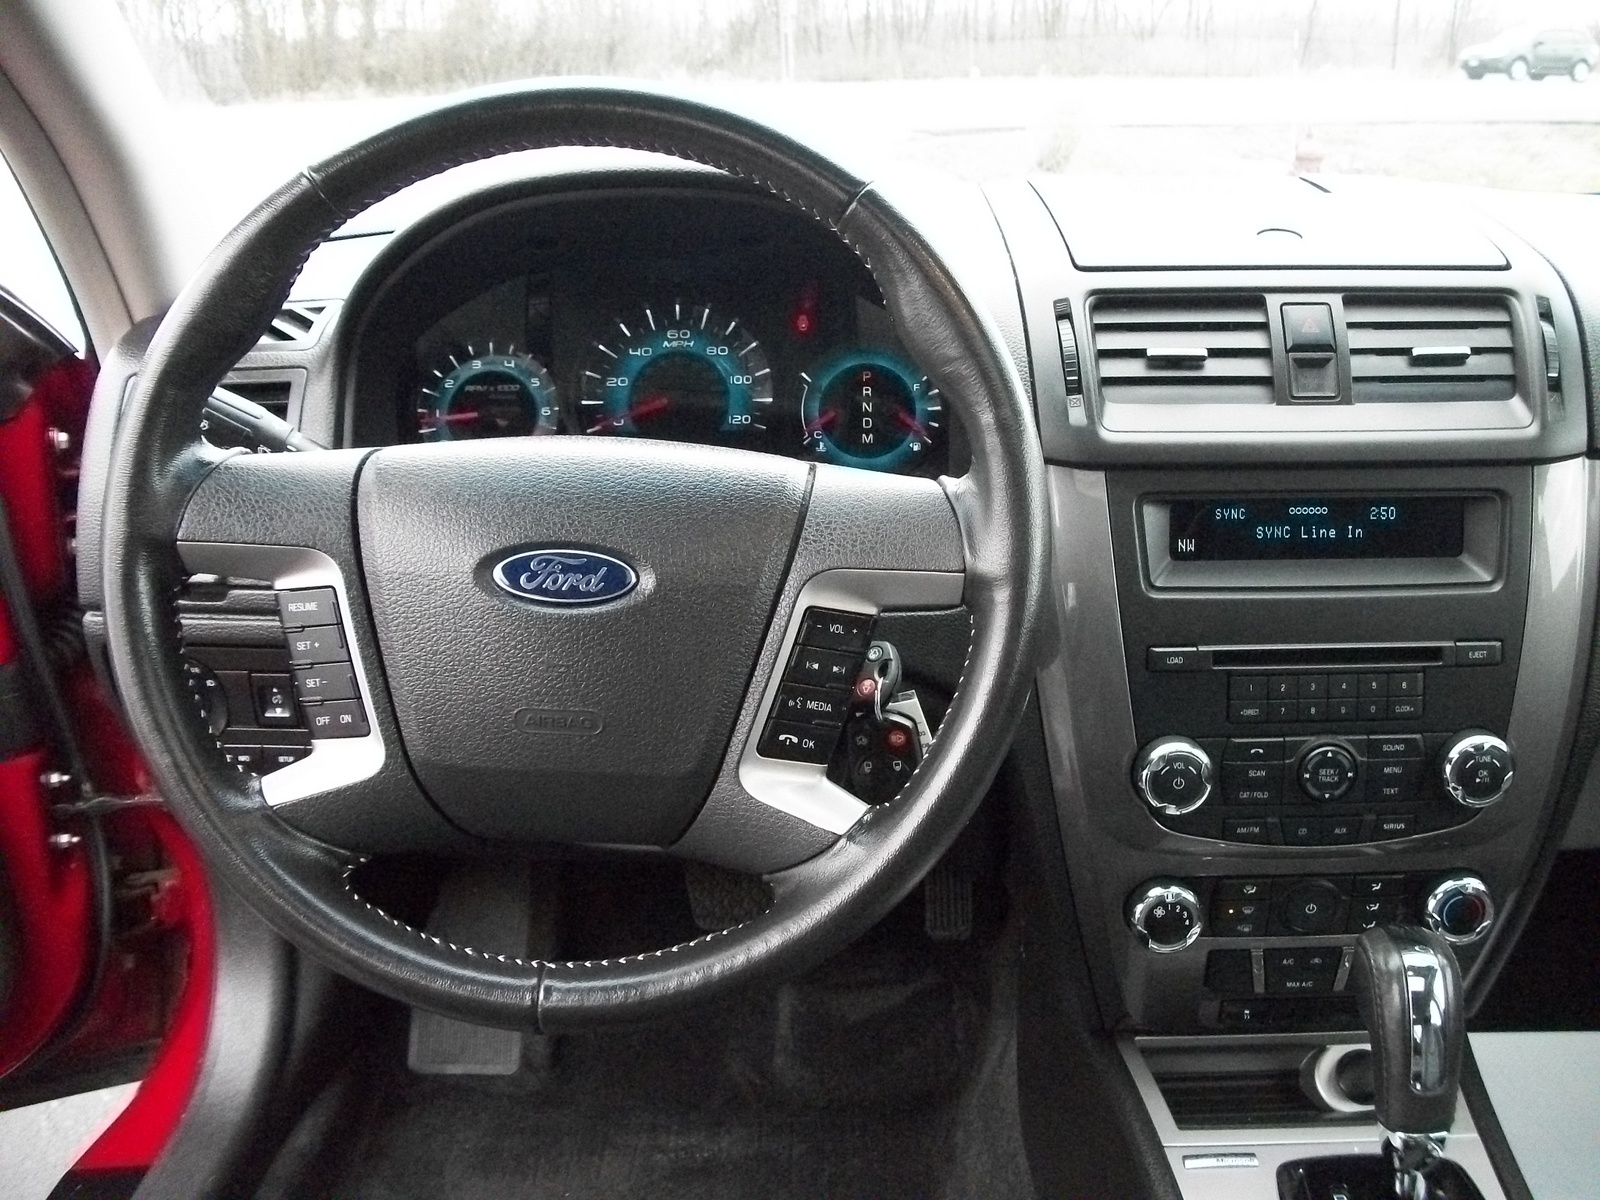 2010 Ford fusion stereo install #8